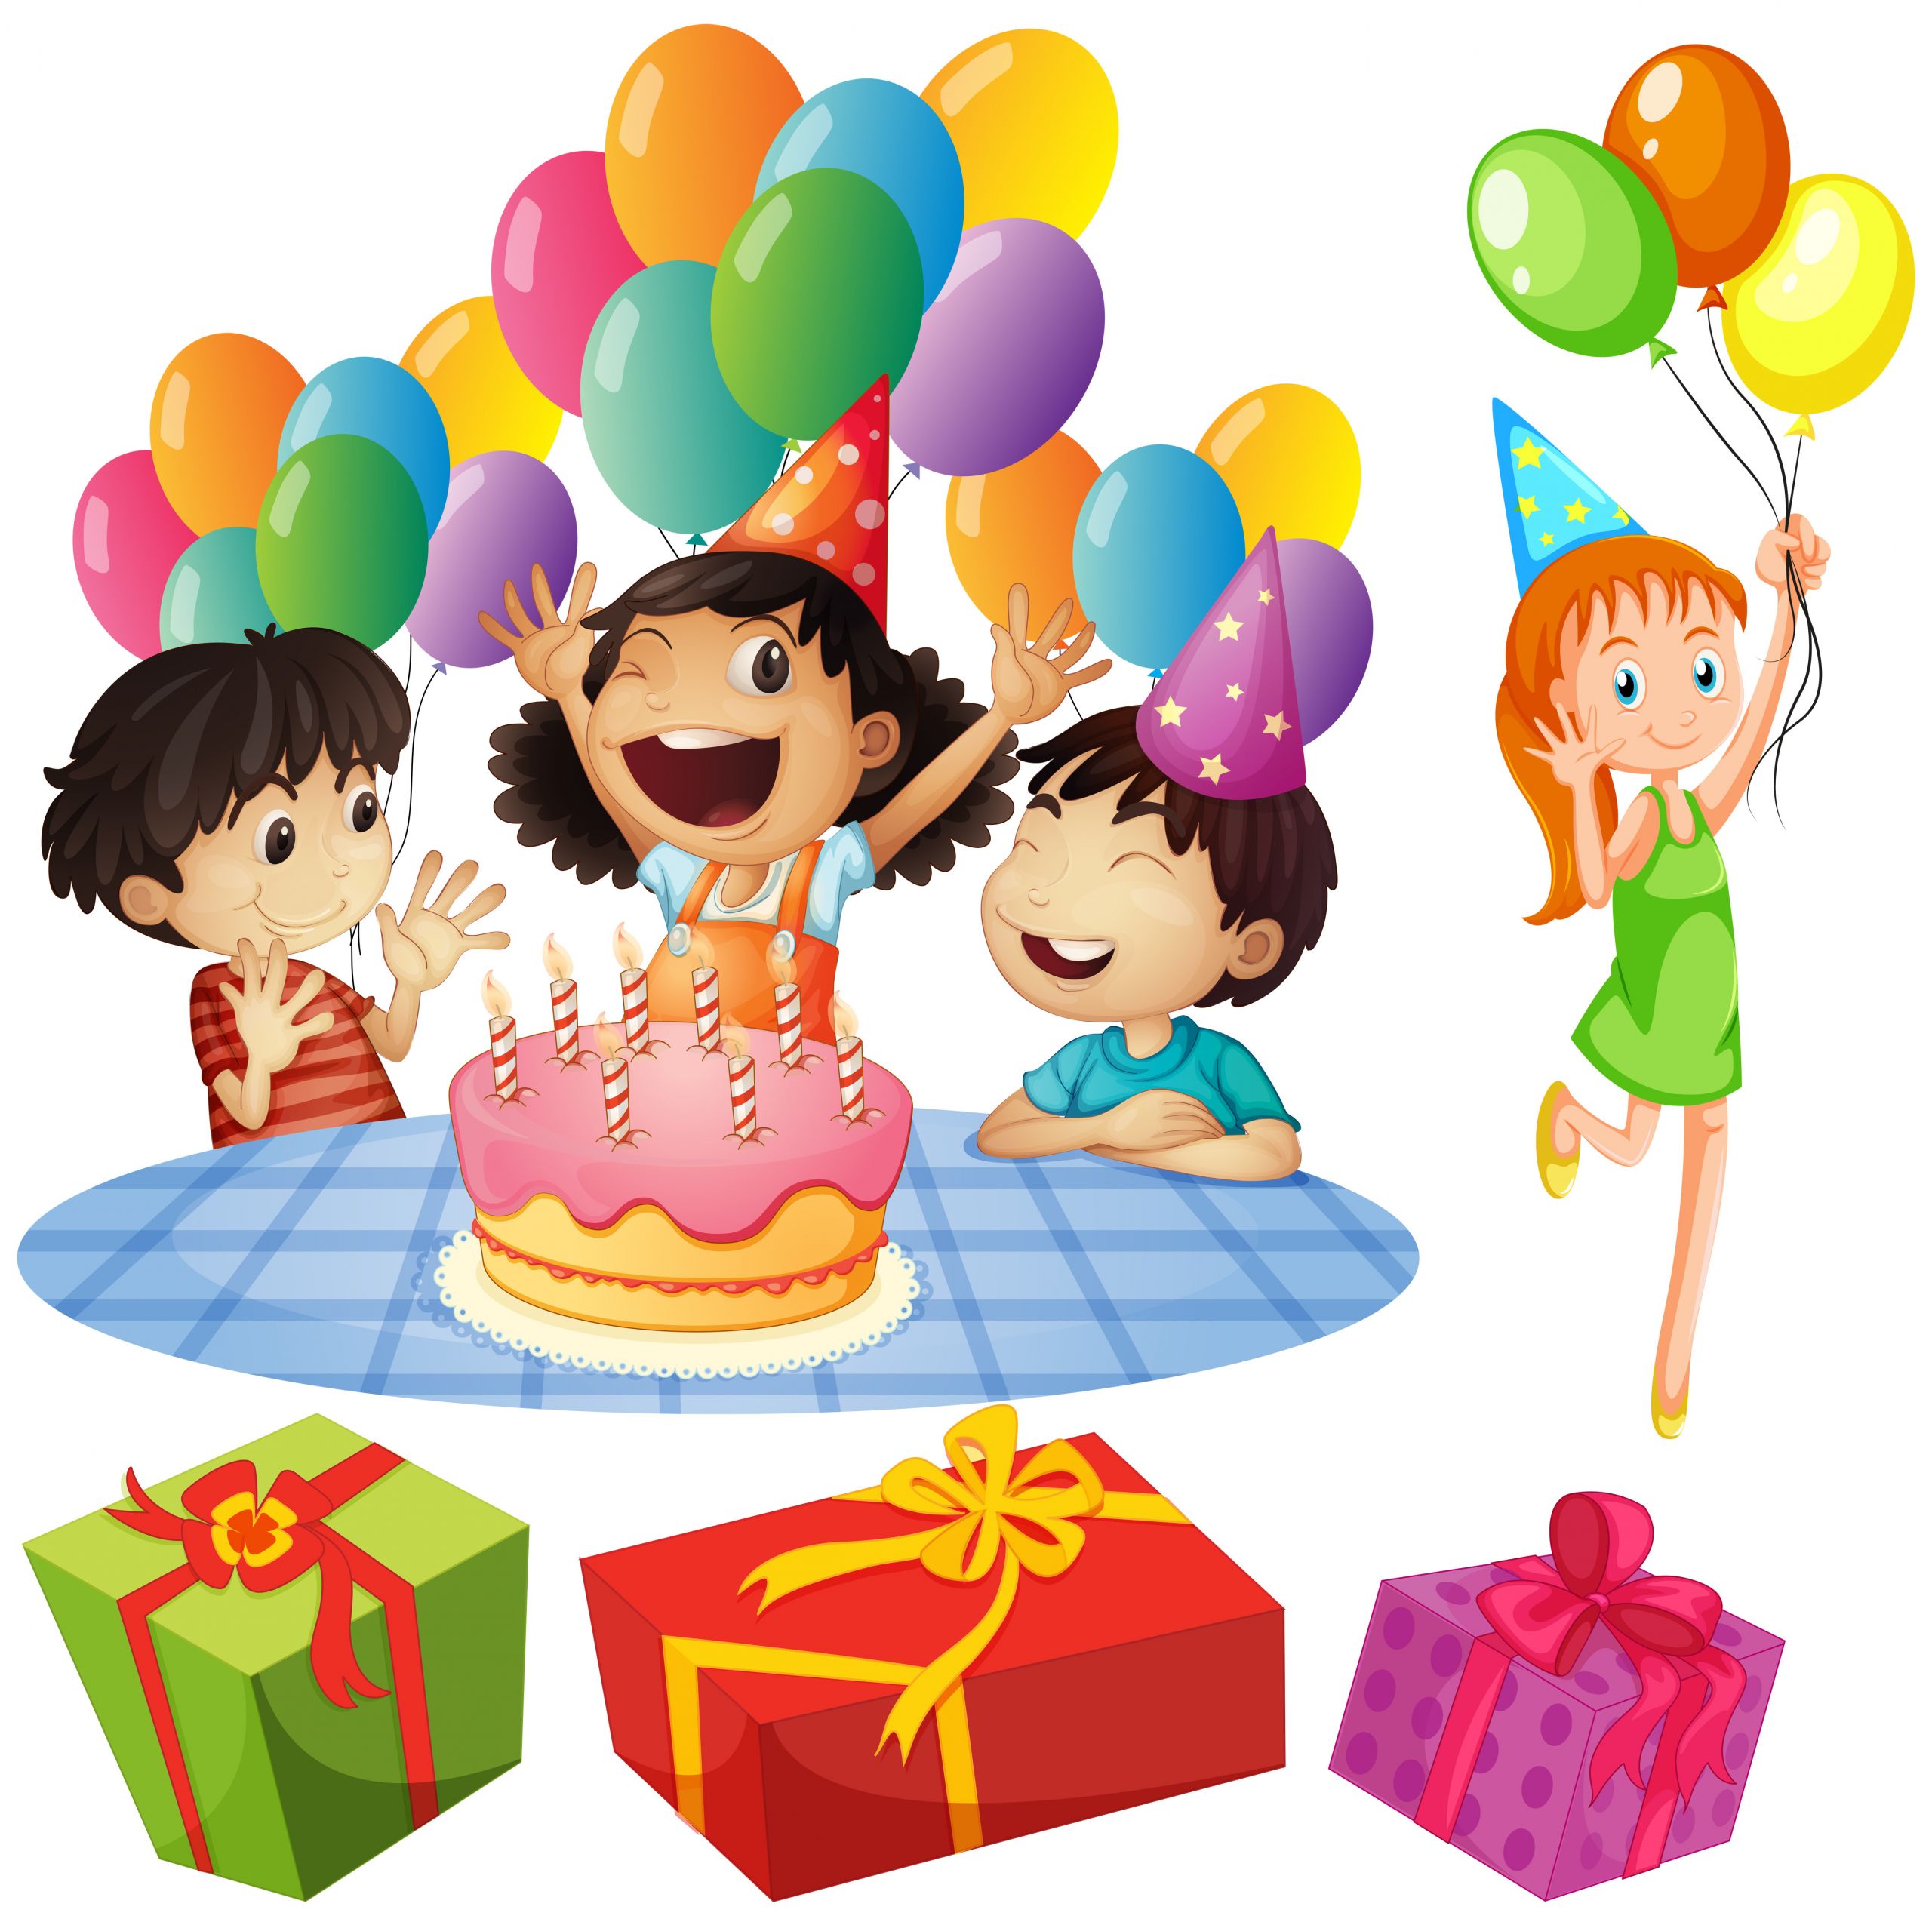 Kids Party Clipart
 Kids at birthday party with balloons and presents